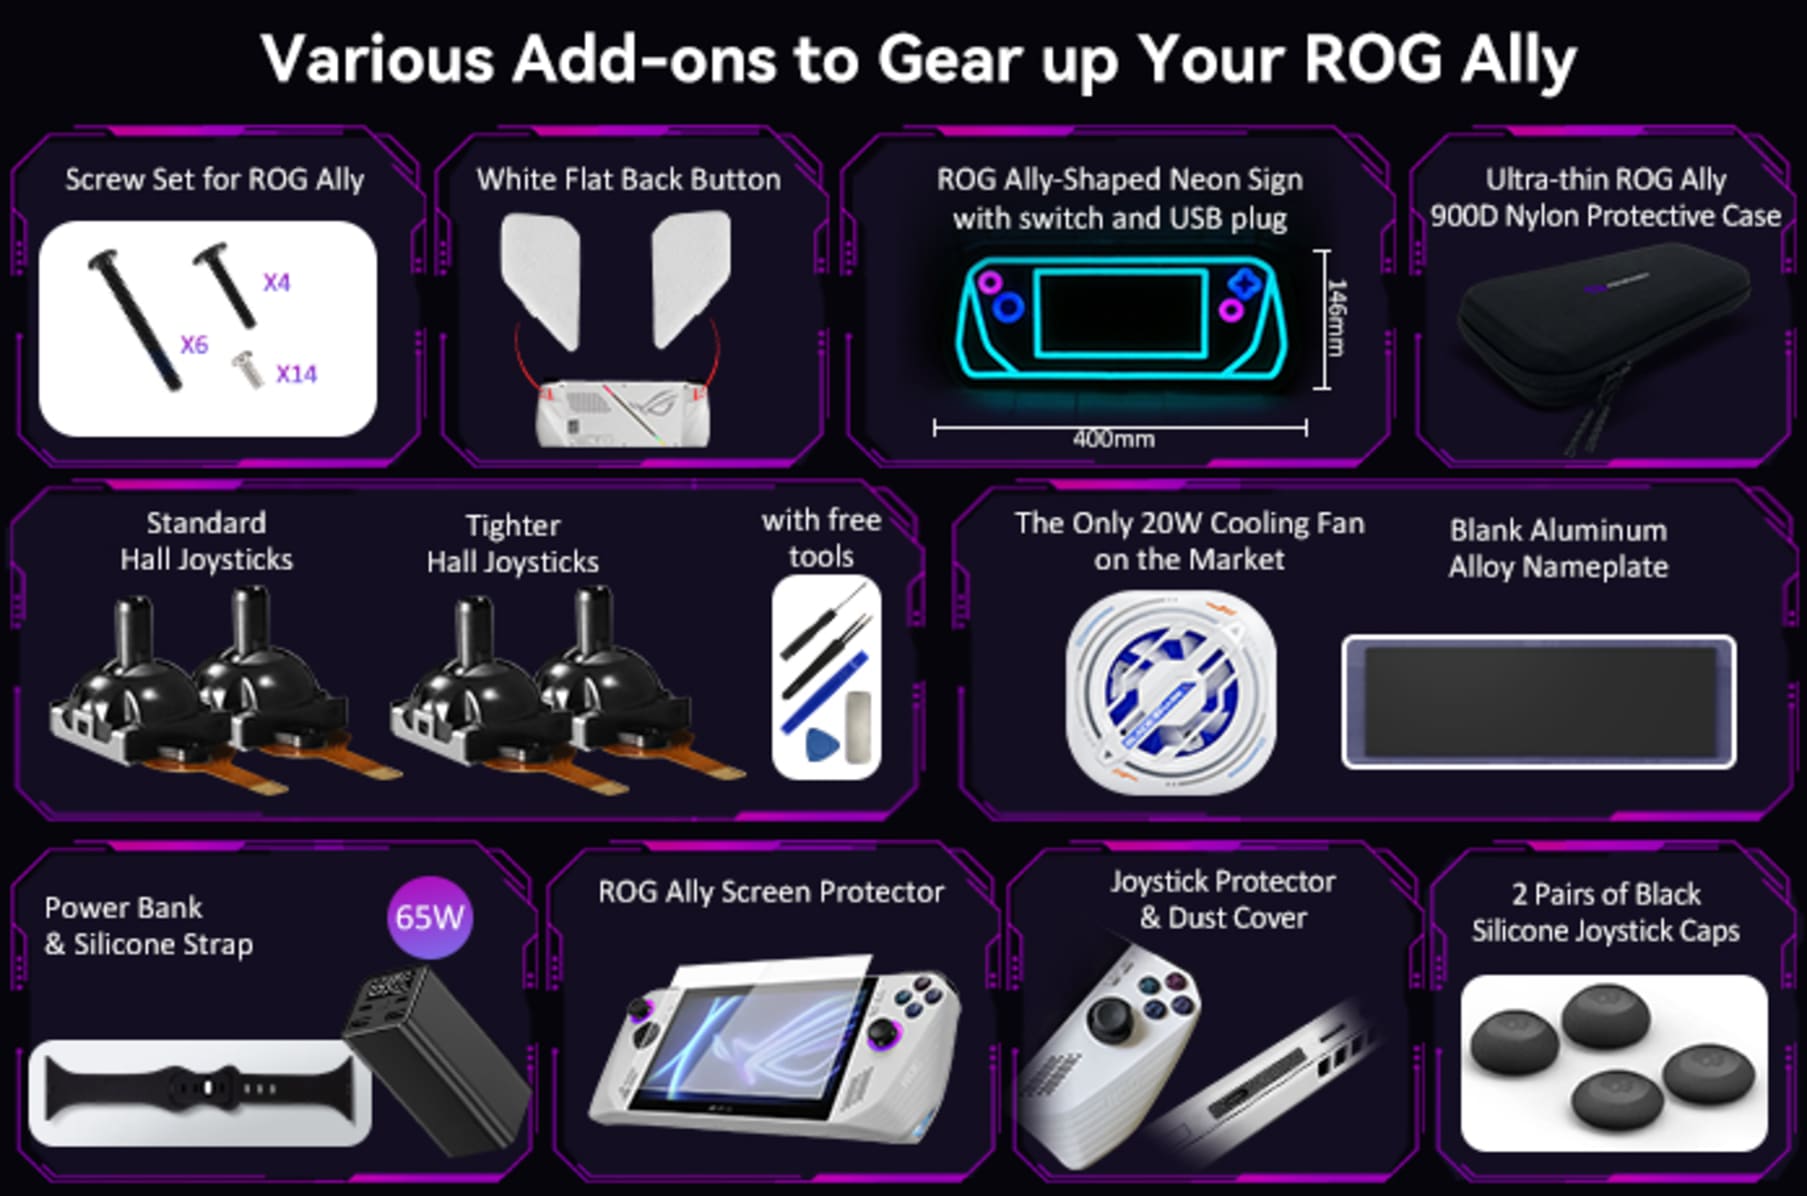 ROG Ally handheld console translucent case hits Indiegogo - Geeky